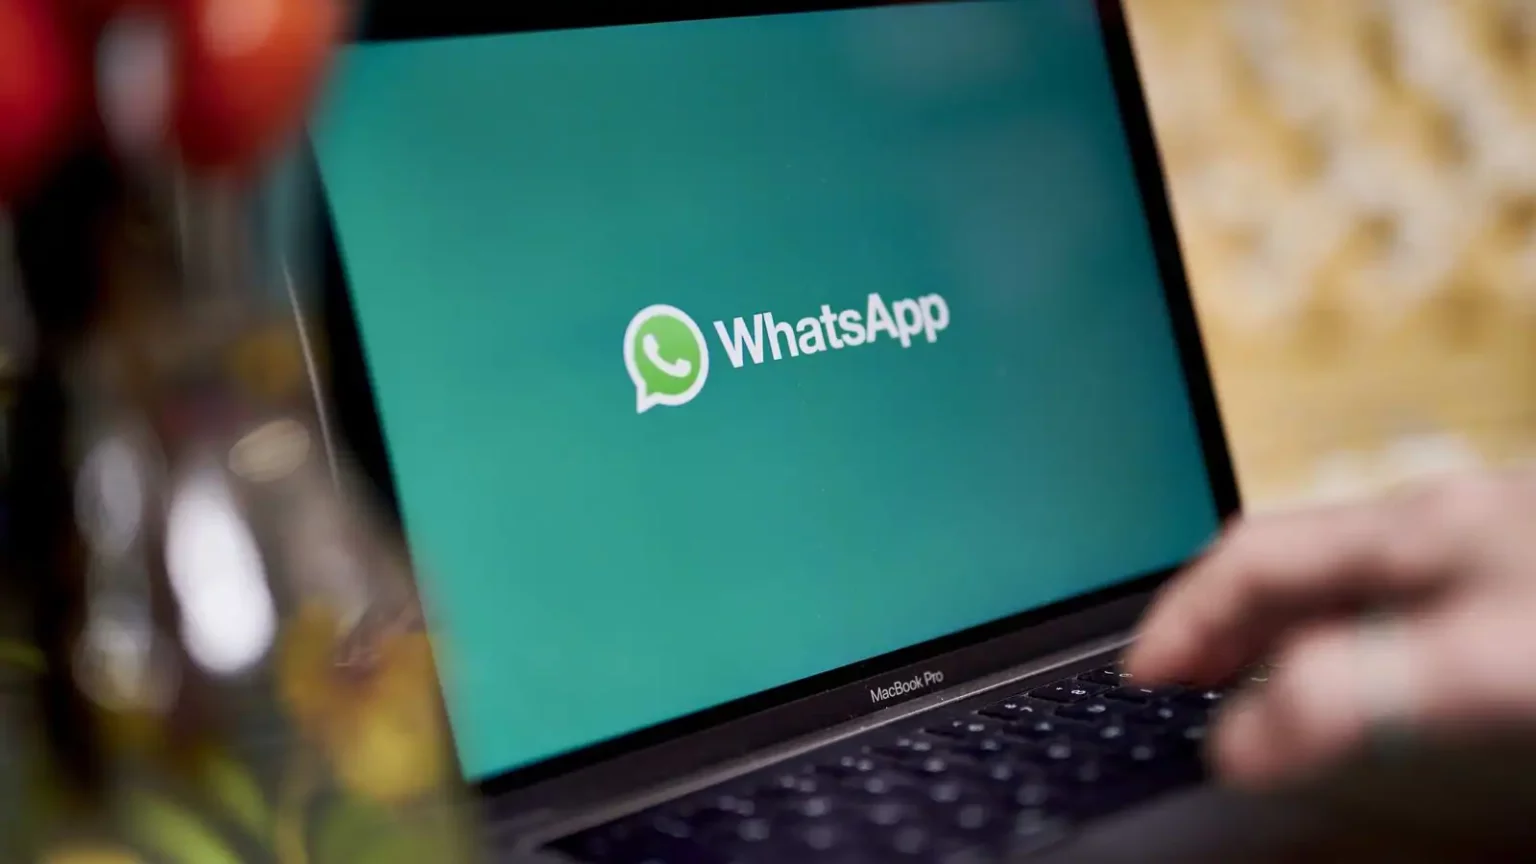 whatsapp-improves-user-experience-with-latest-update-on-macos